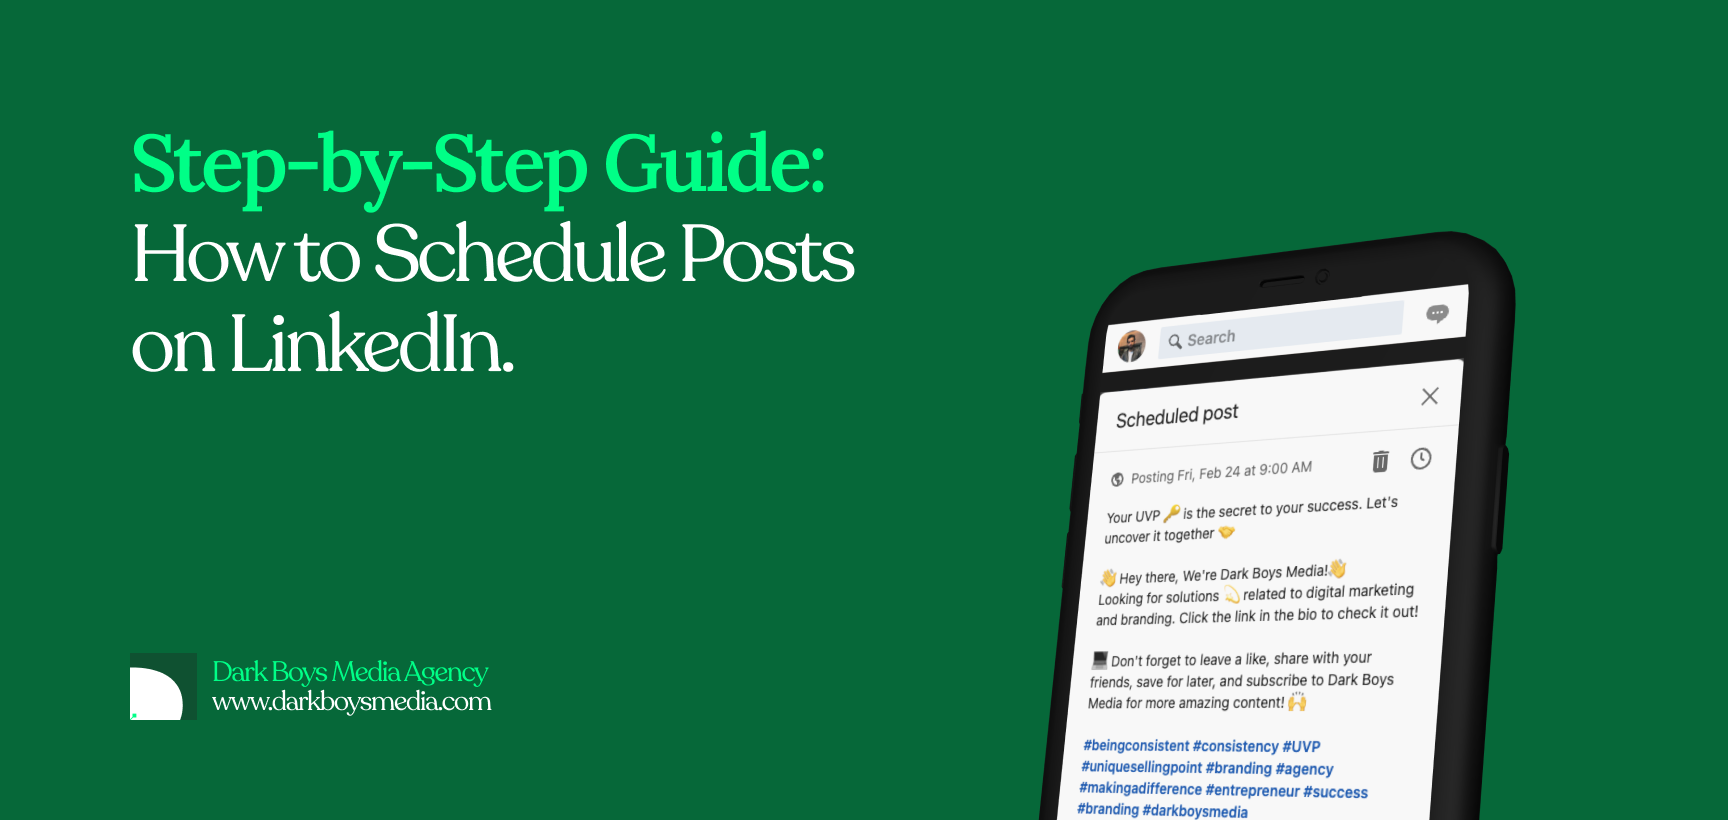 How to Schedule Posts on LinkedIn